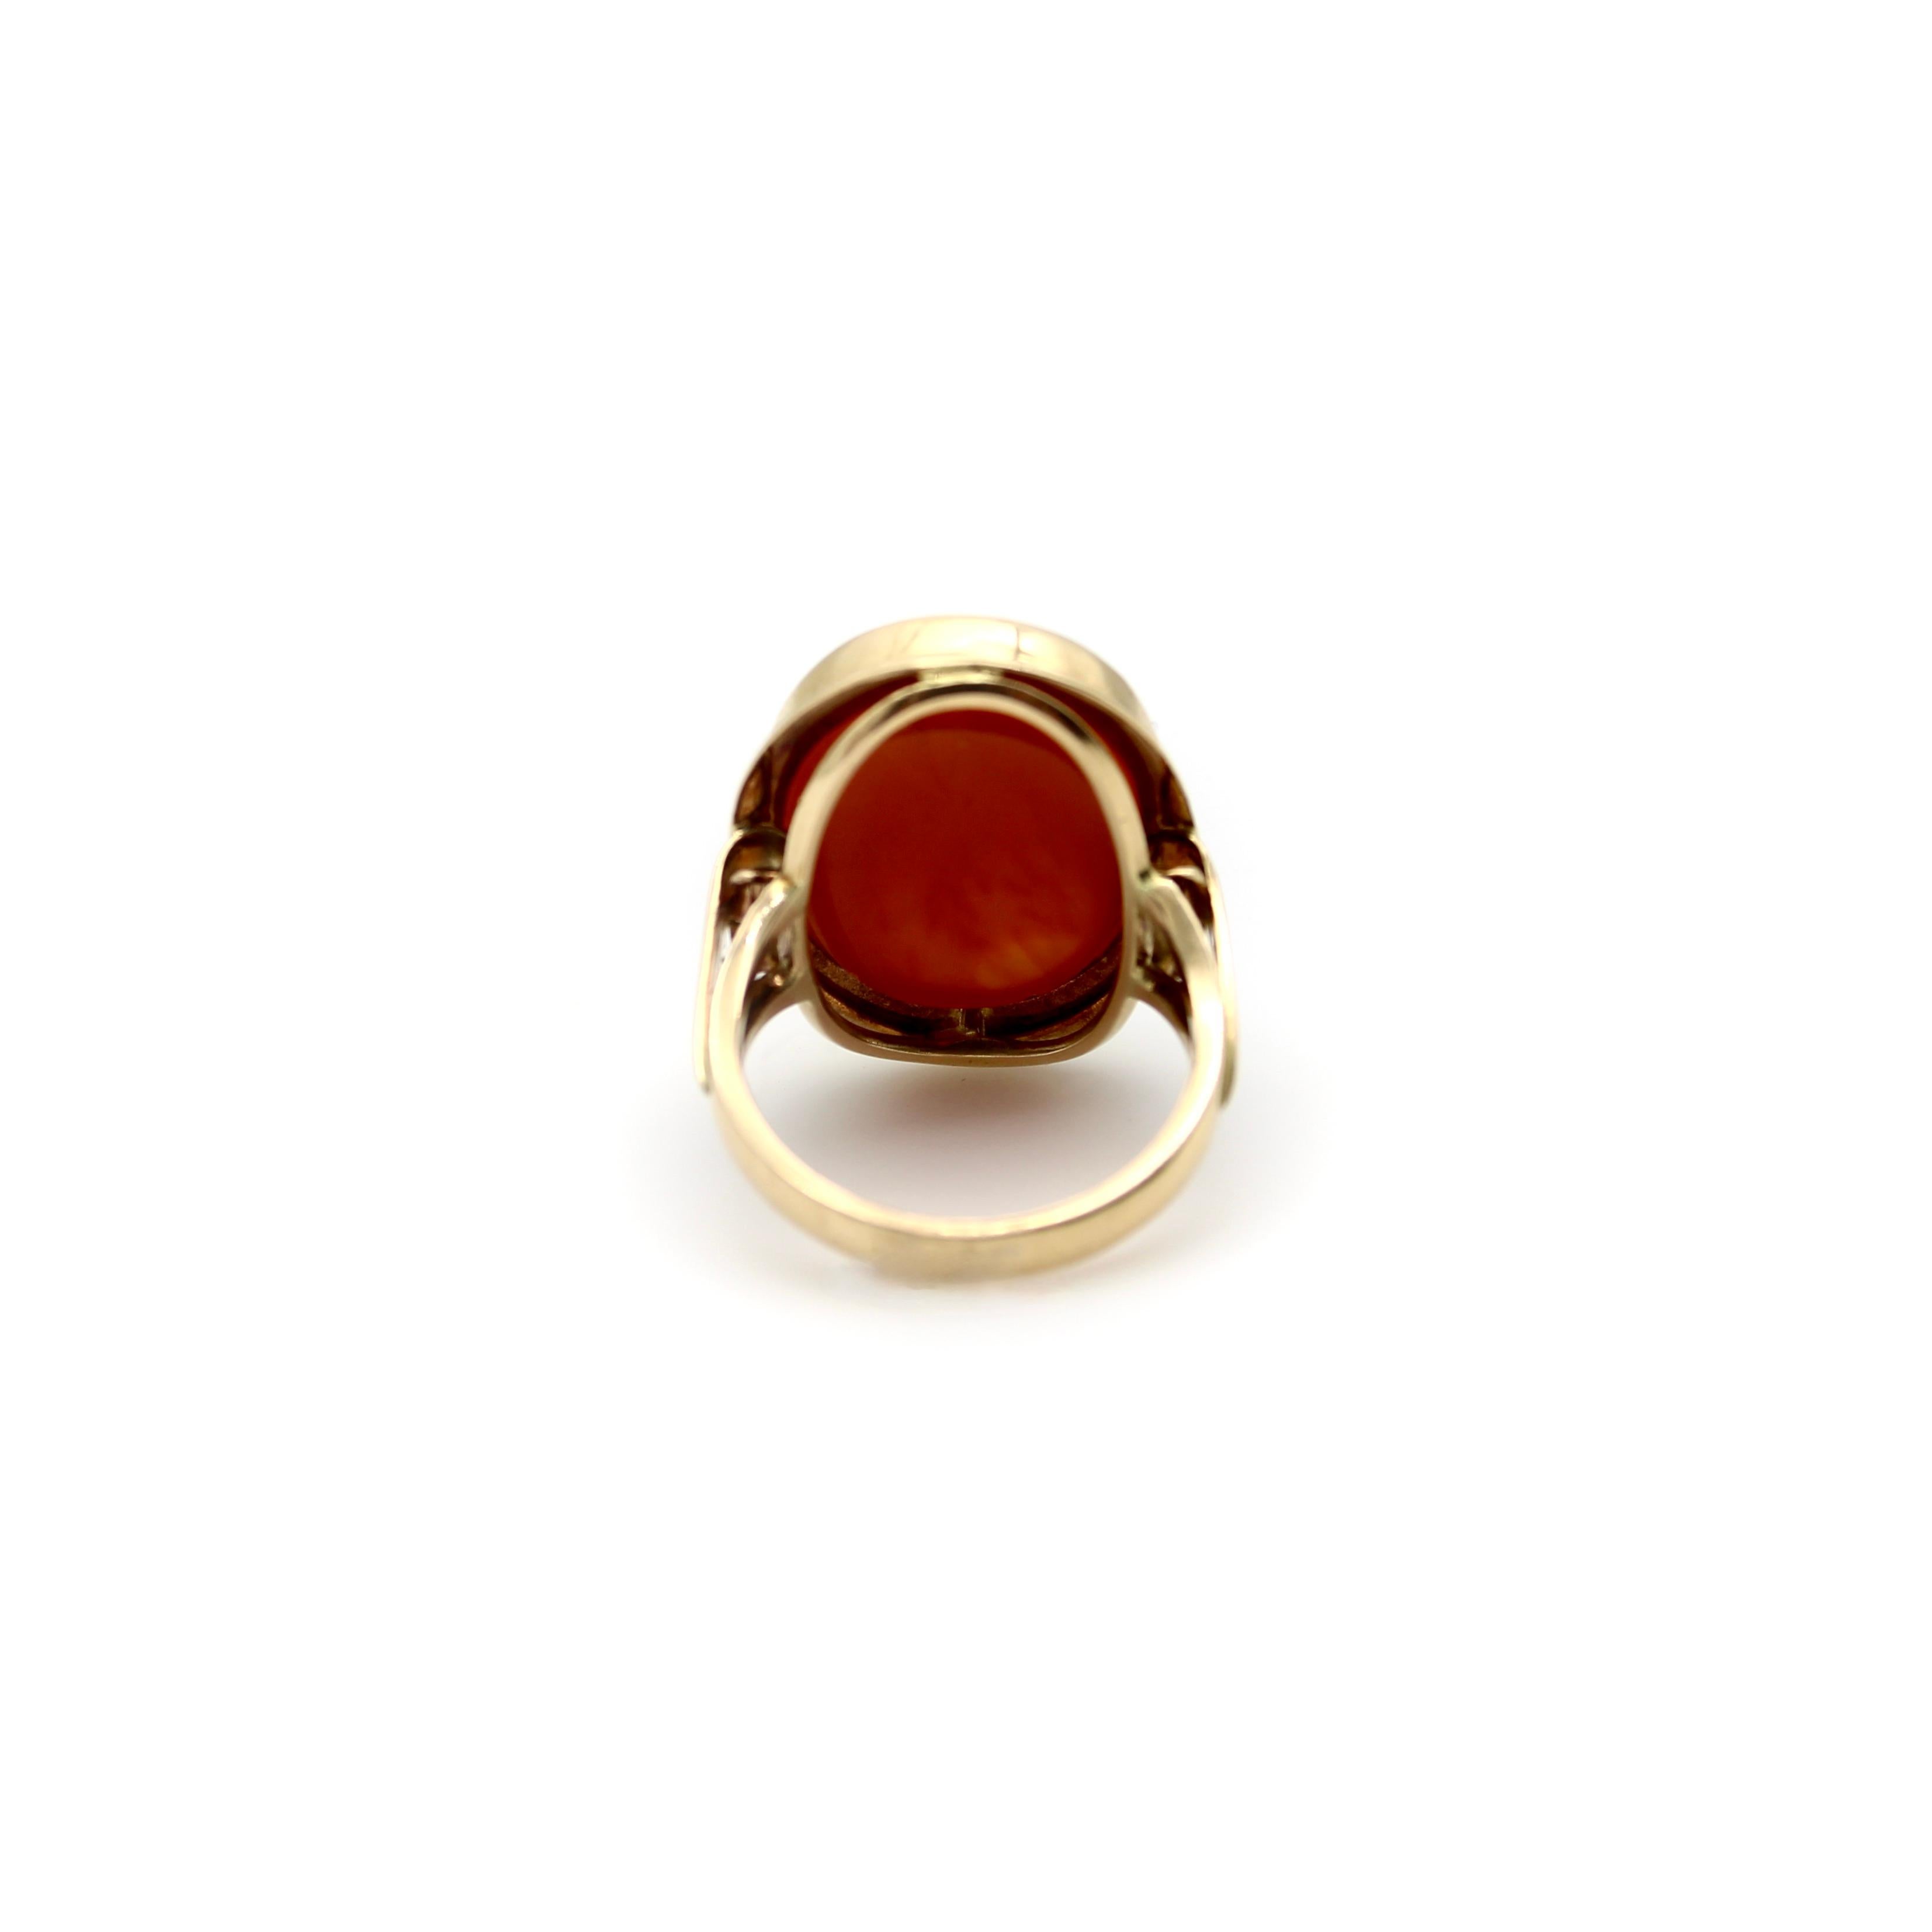 Tumbled Victorian 14k Gold Banded Agate Intaglio Signet Ring with Shield For Sale